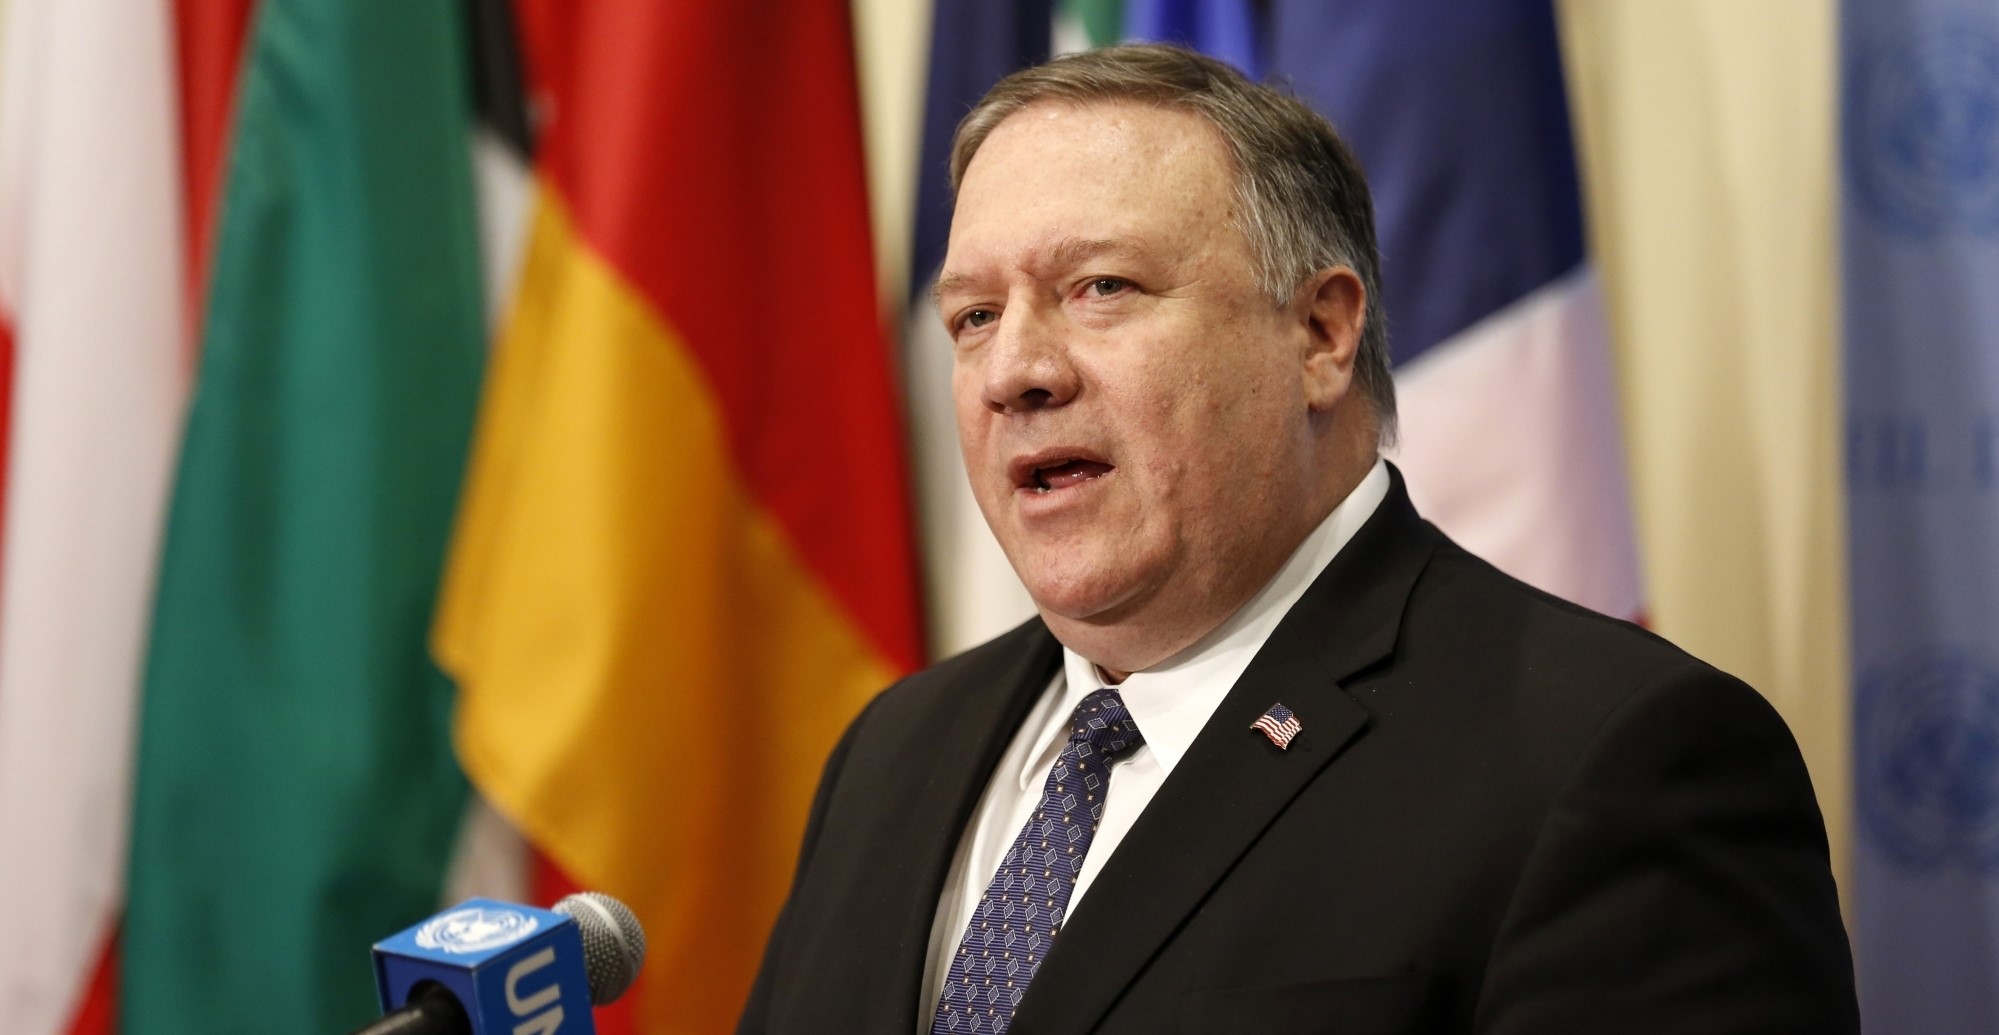 Pompeo: U.S. prepared to help Lebanon if it carries out real reforms